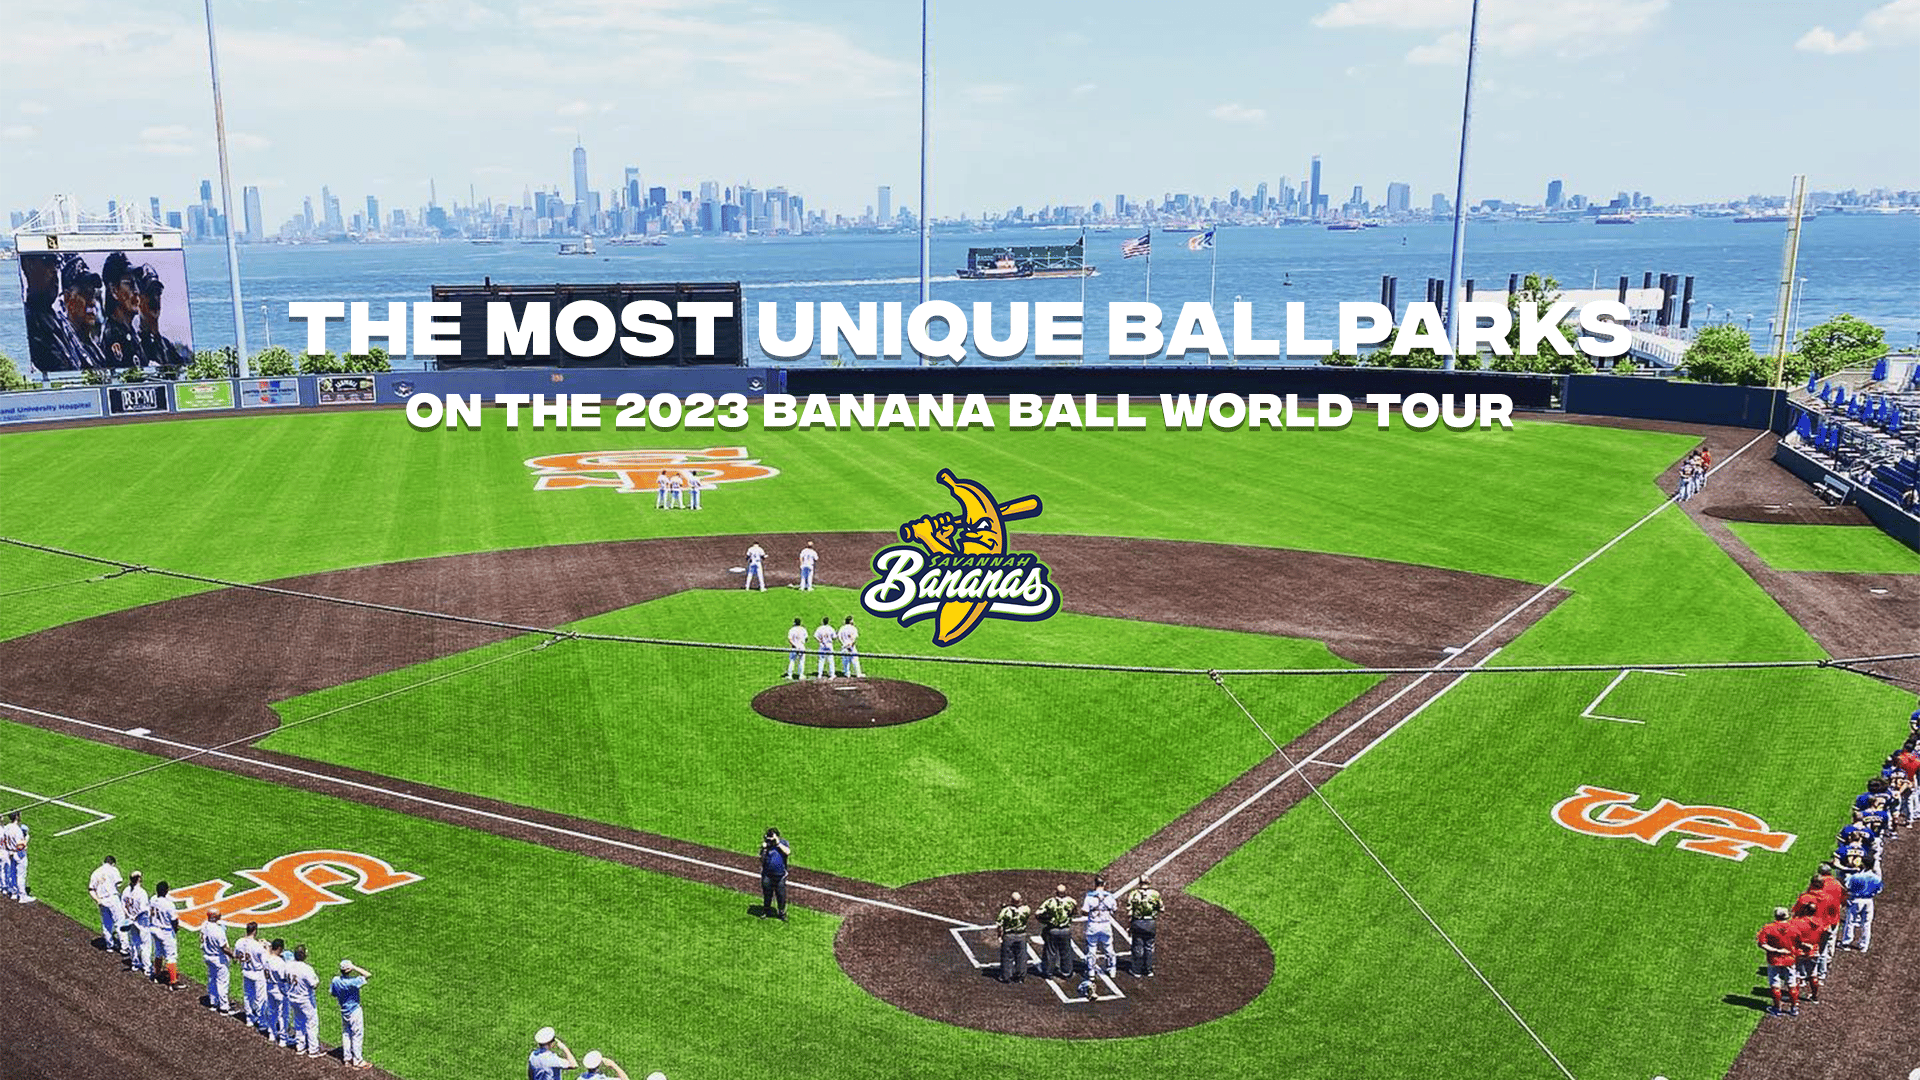 The Most Unique Stadiums on the 2023 Banana Ball World Tour